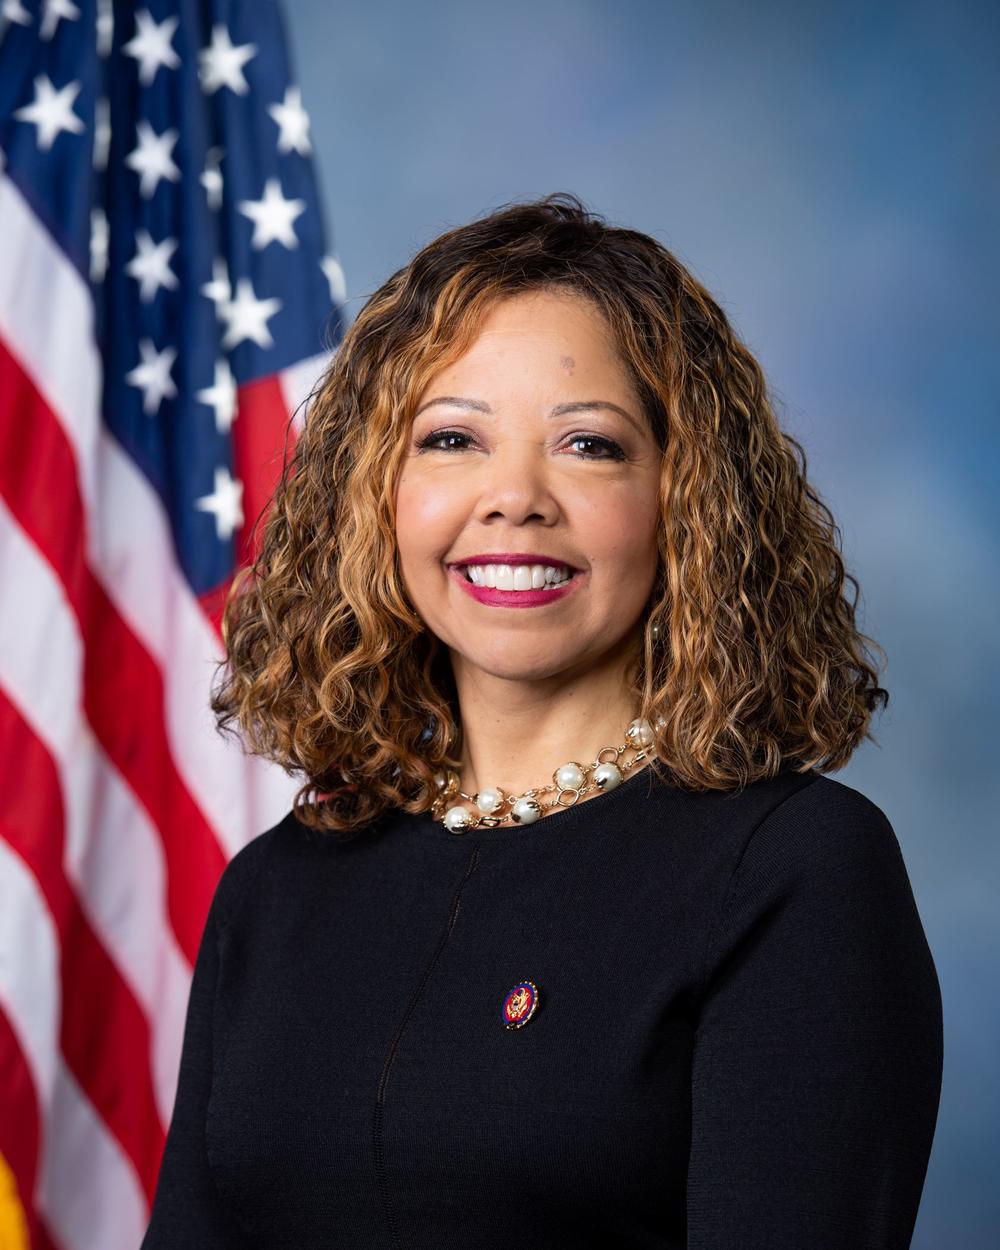 U.S. Rep. Lucy McBath (D-GA) is shown in this official photo.